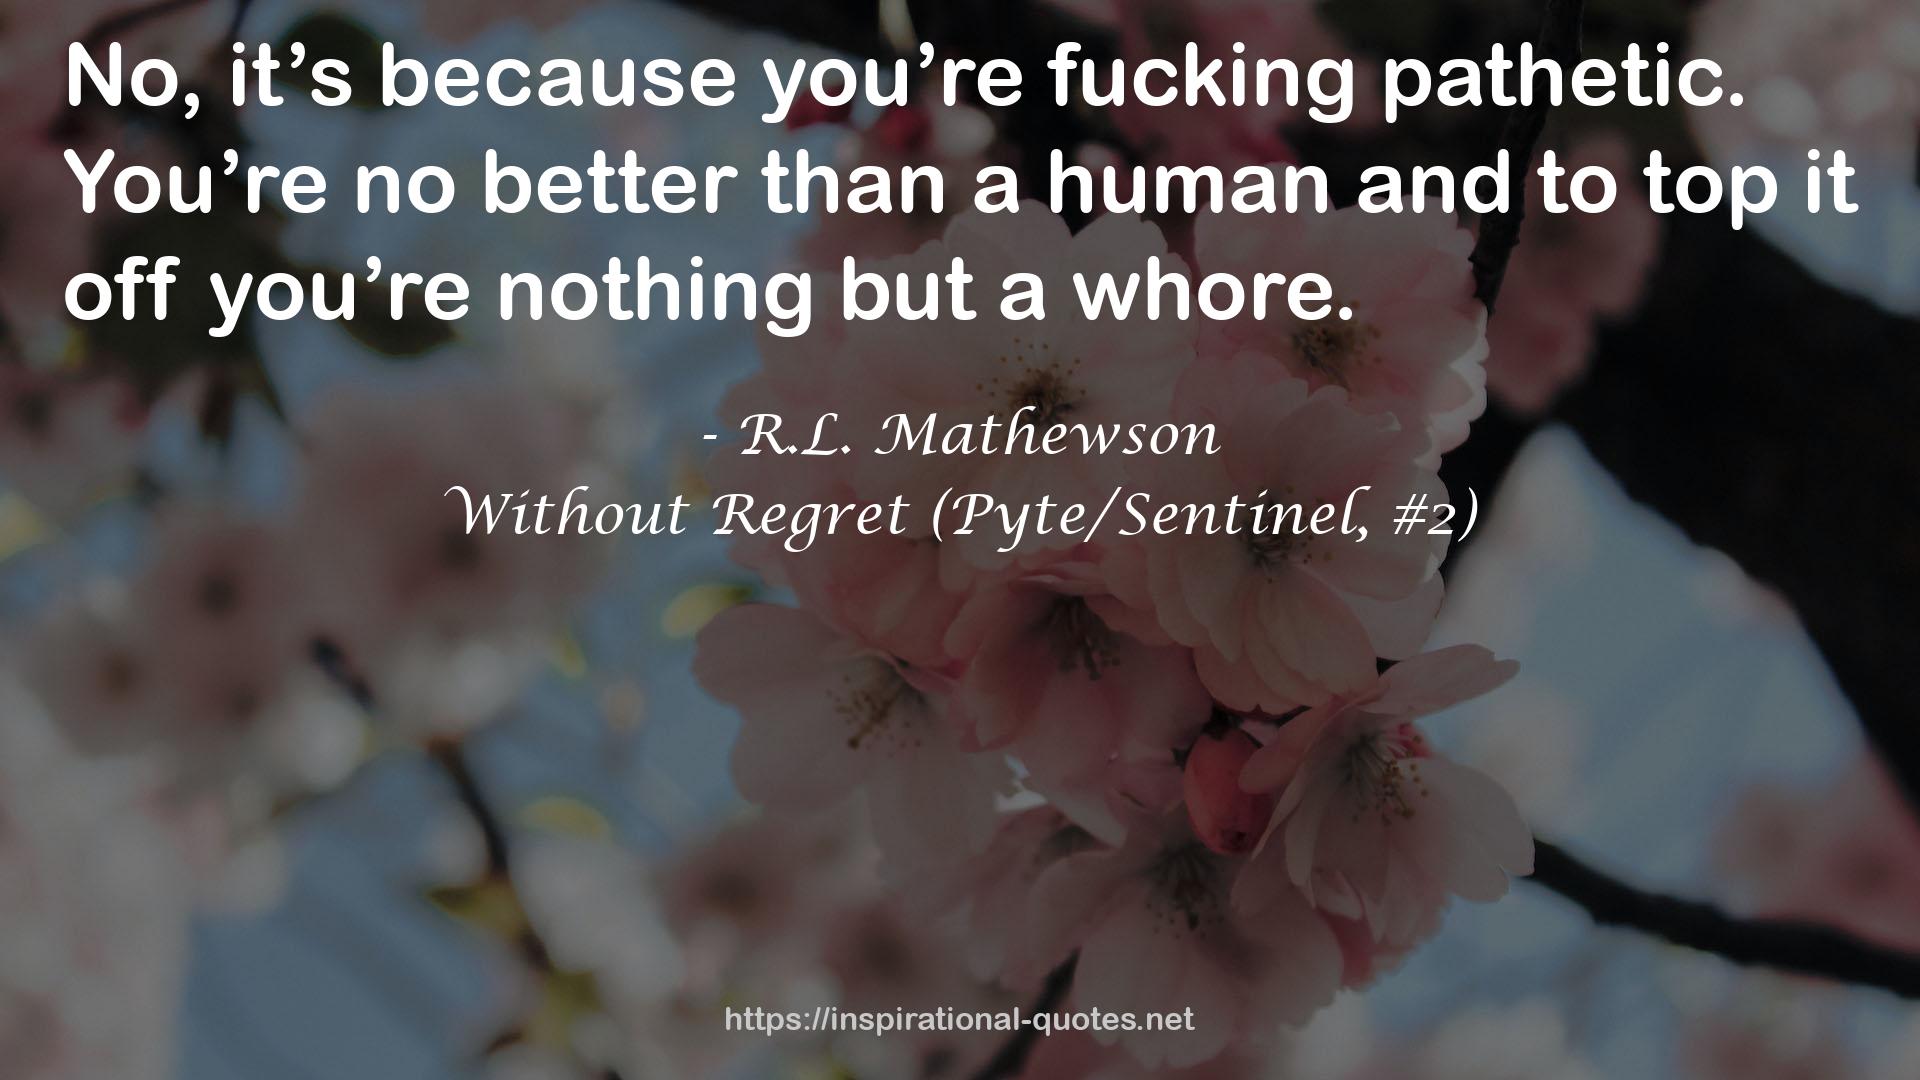 Without Regret (Pyte/Sentinel, #2) QUOTES